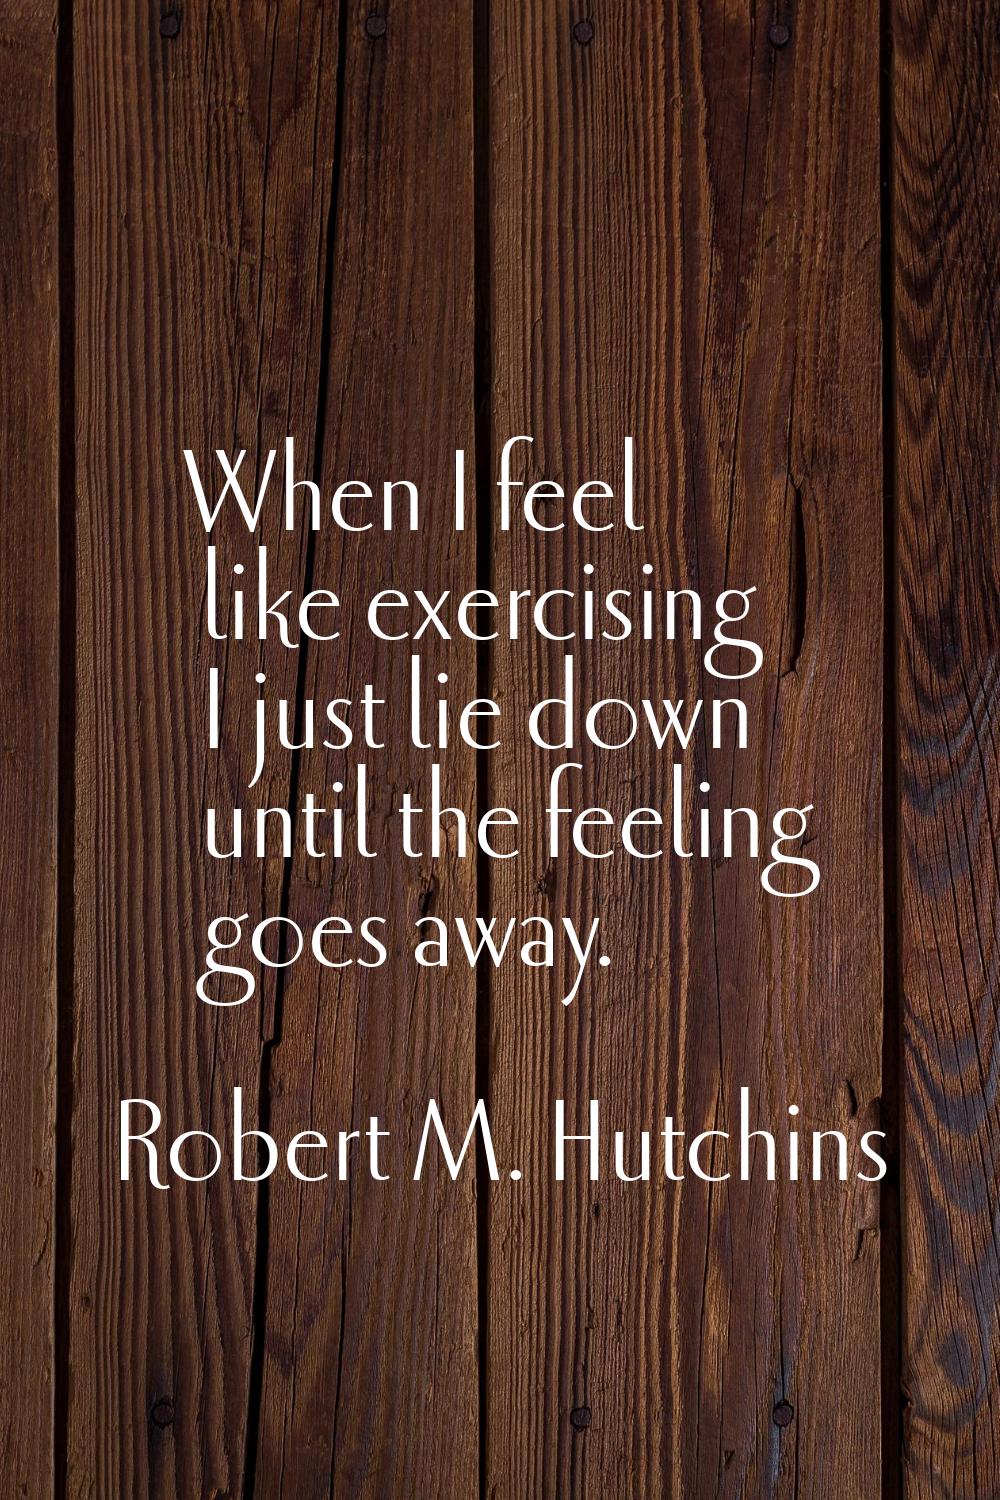 When I feel like exercising I just lie down until the feeling goes away.